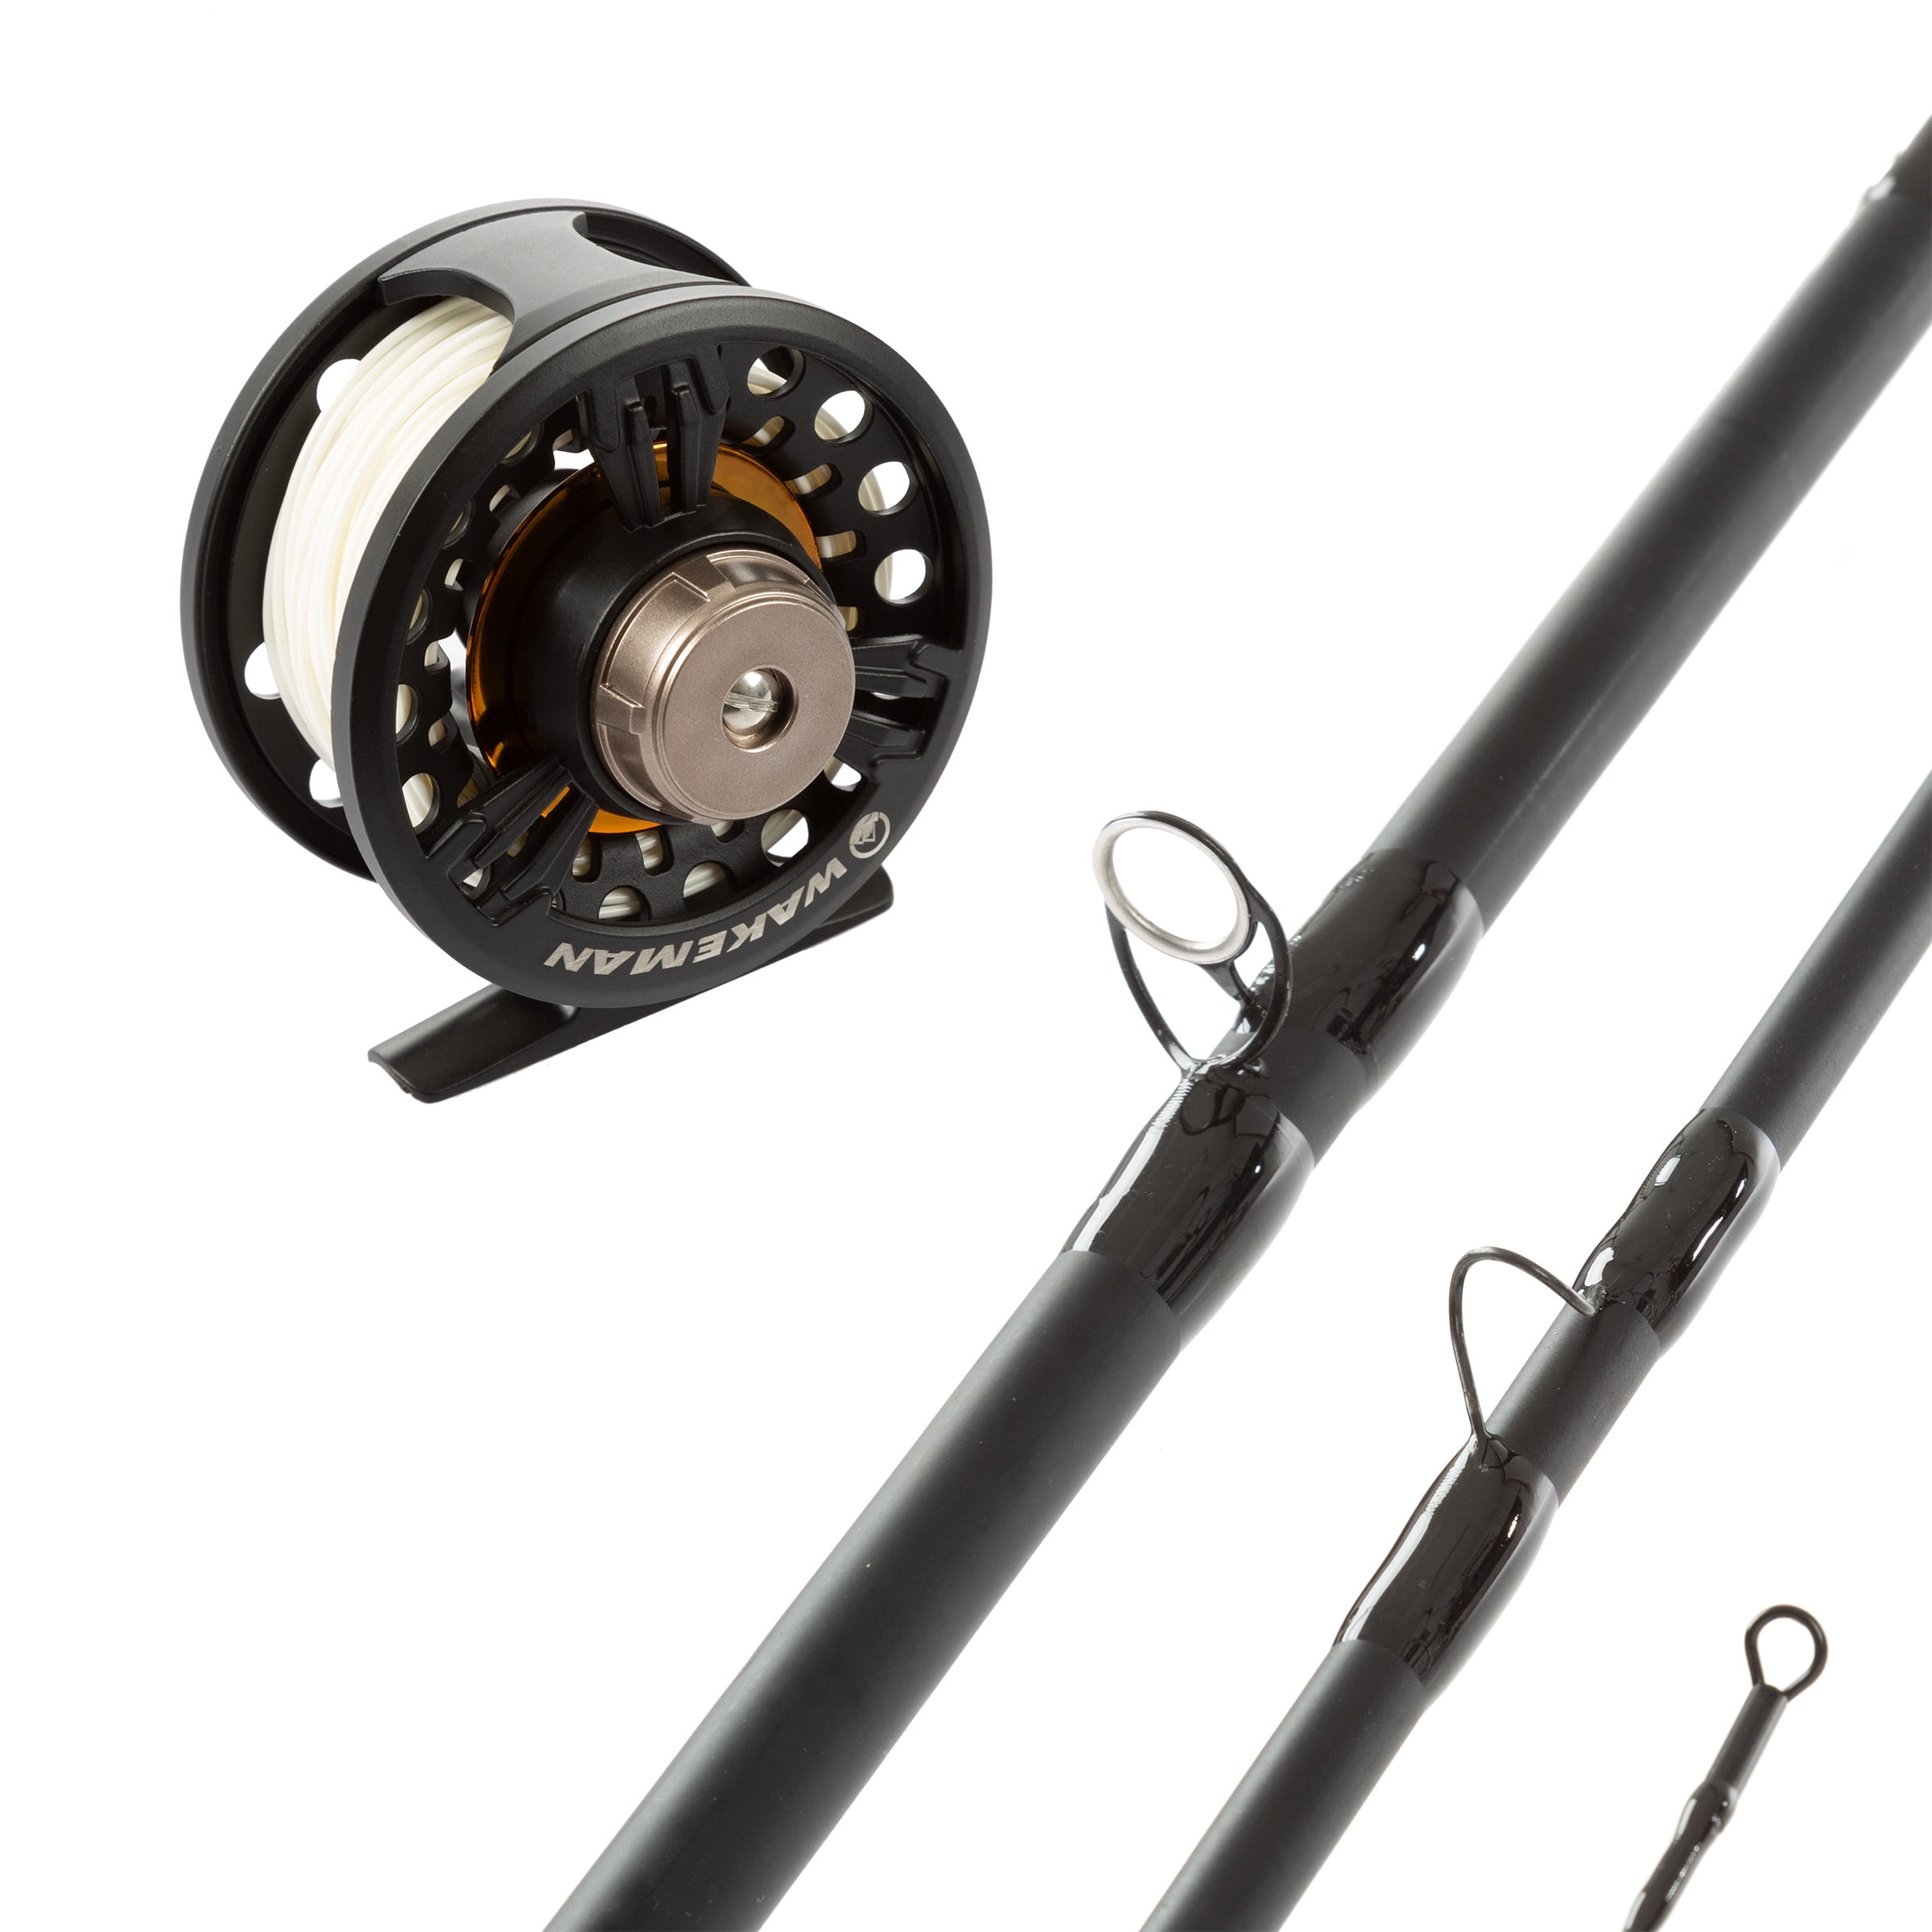 Wakeman 3-Piece Fly Fishing Rod and Reel Combo Starter Kit with Carry Case  